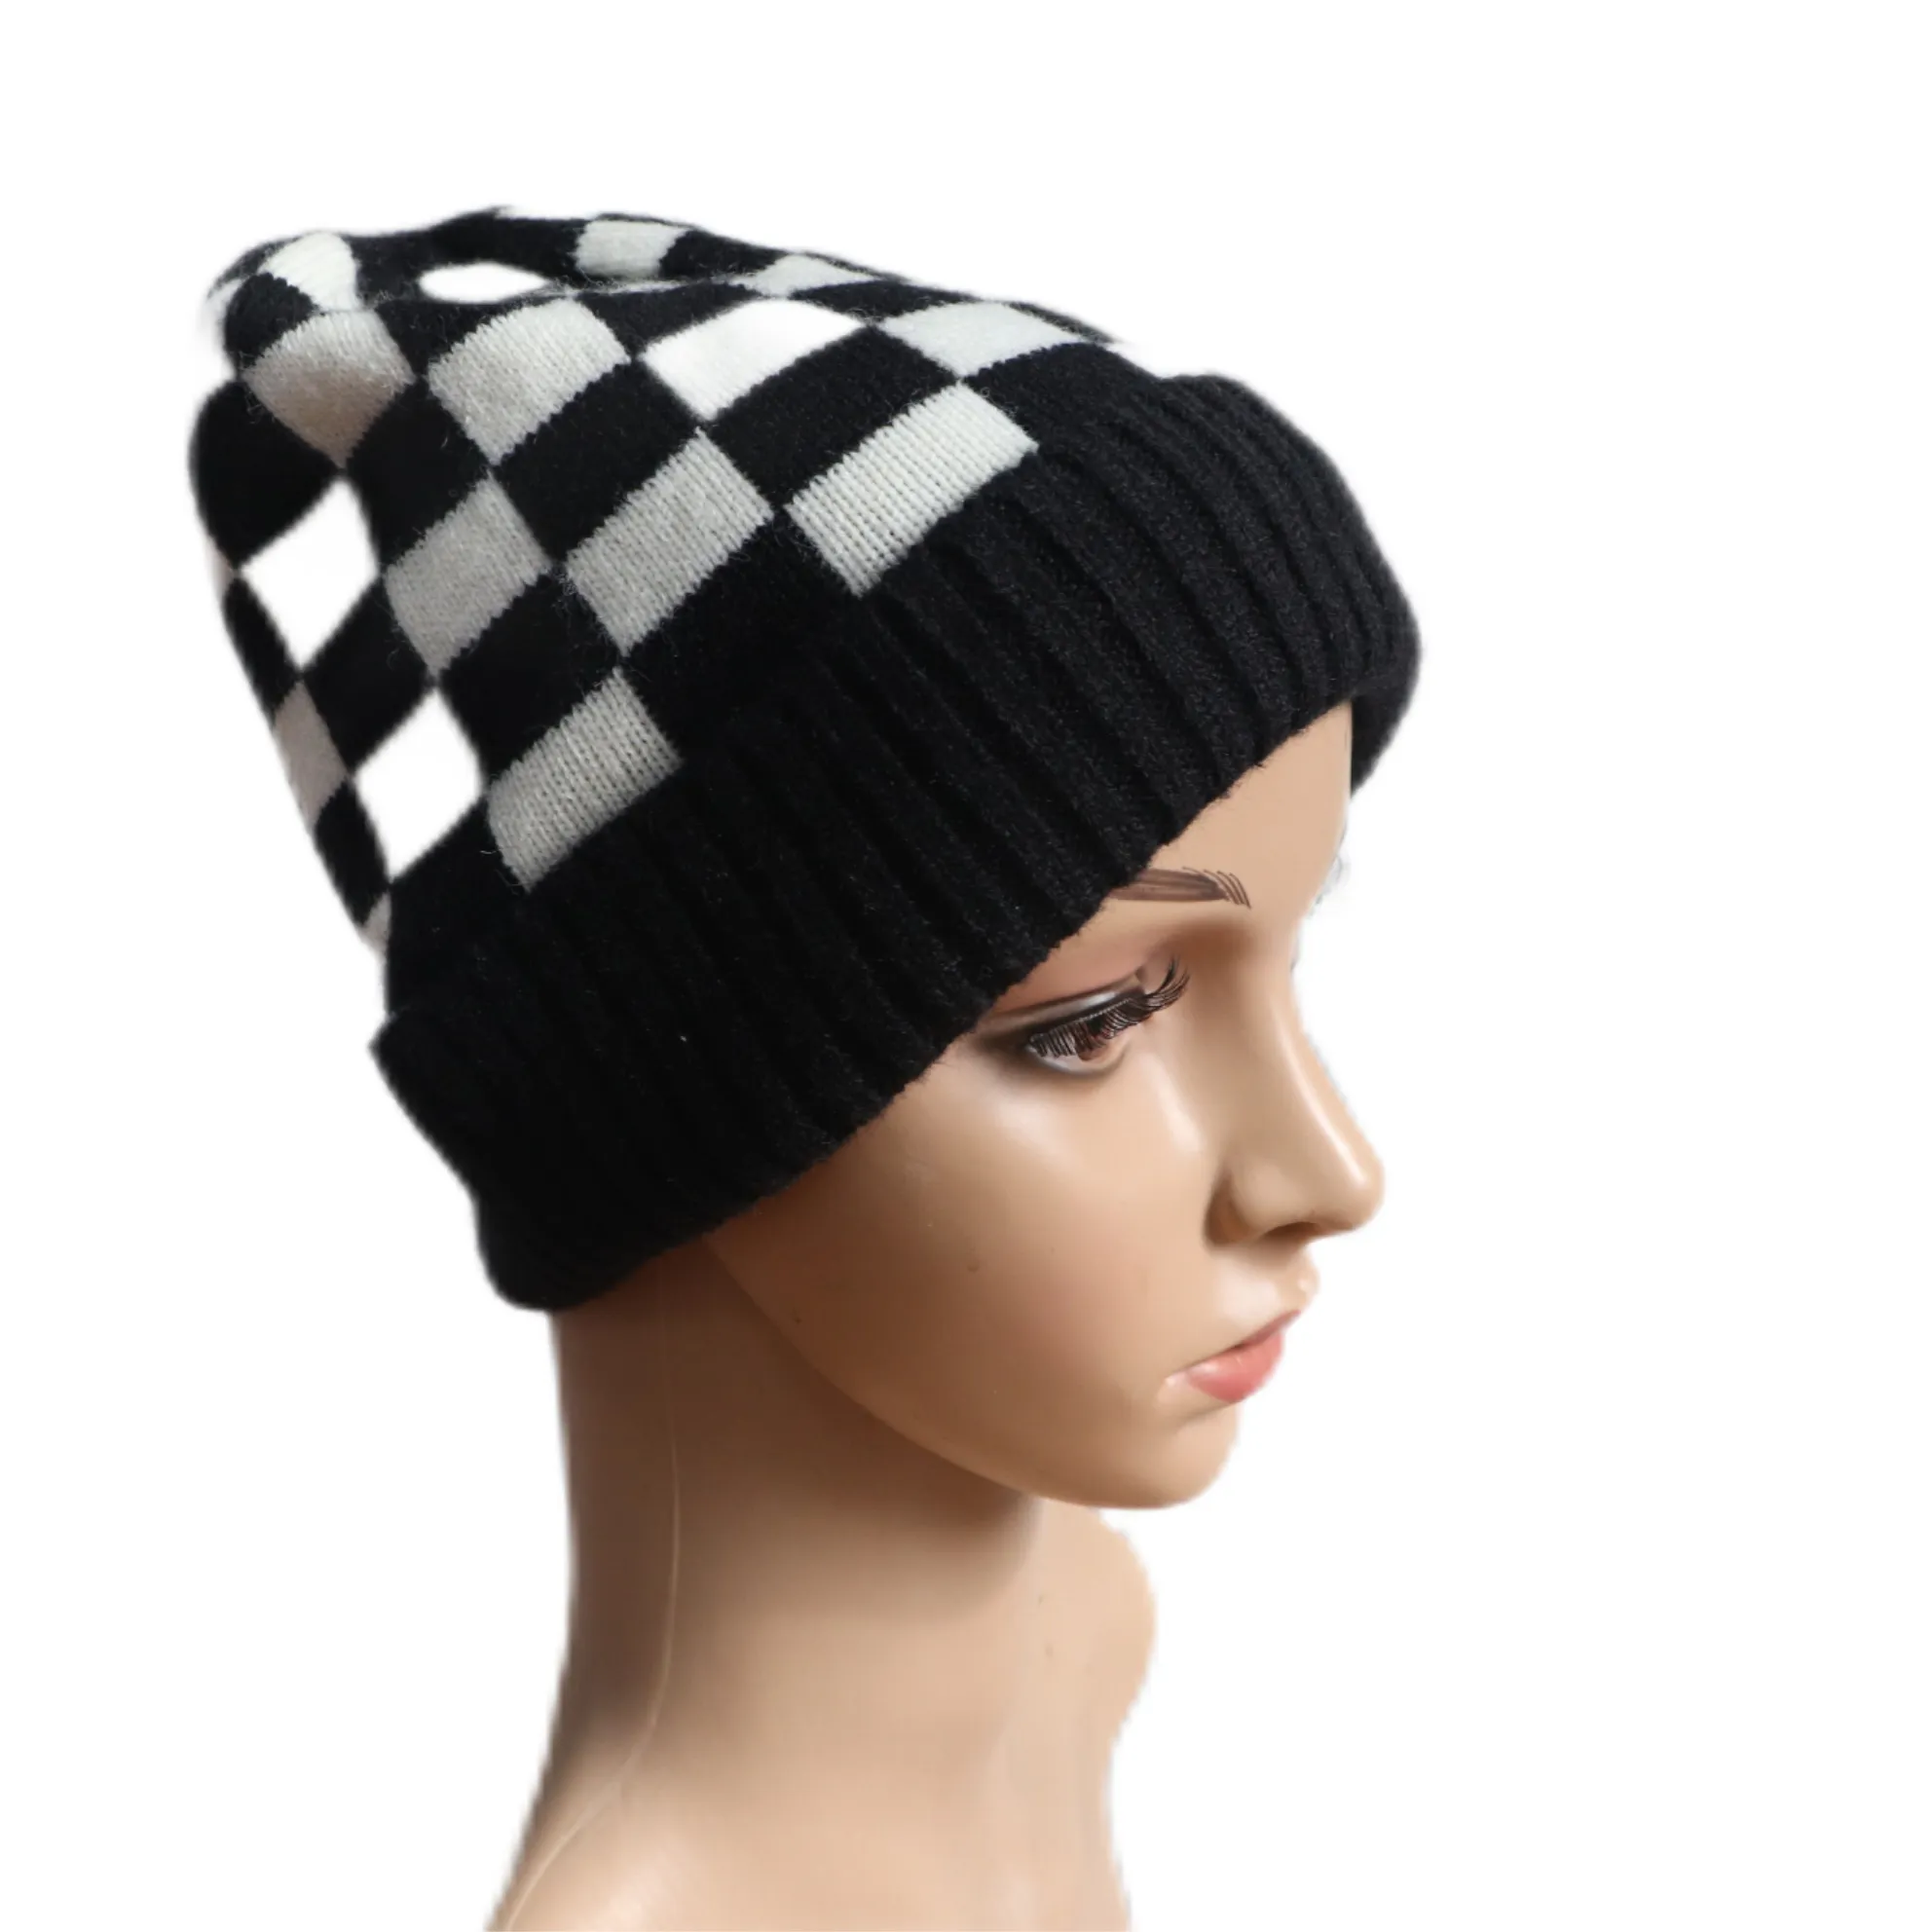 Checkerboard knitted hat winter black and white plaid wool hat autumn men's and women's same style beanie hat